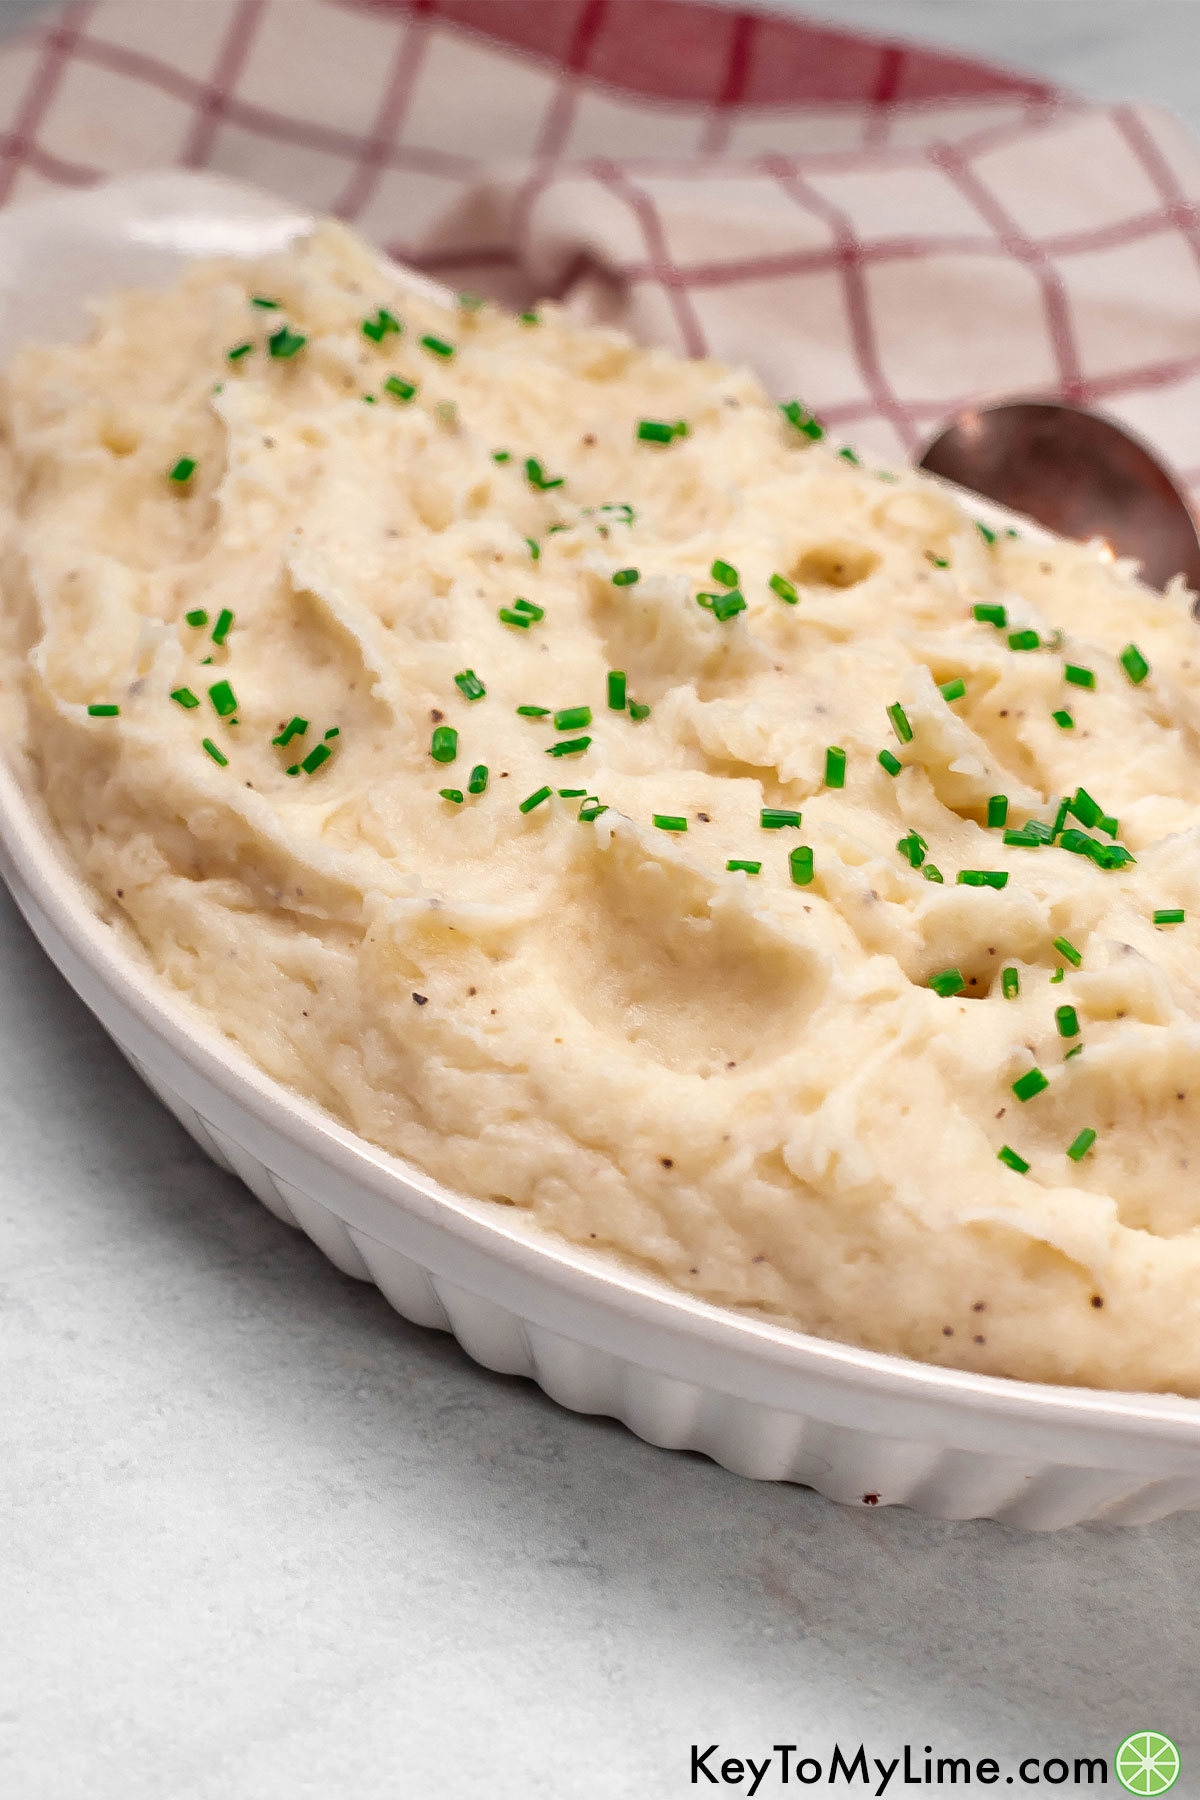 A side image showing the texture of the mashed potatoes.